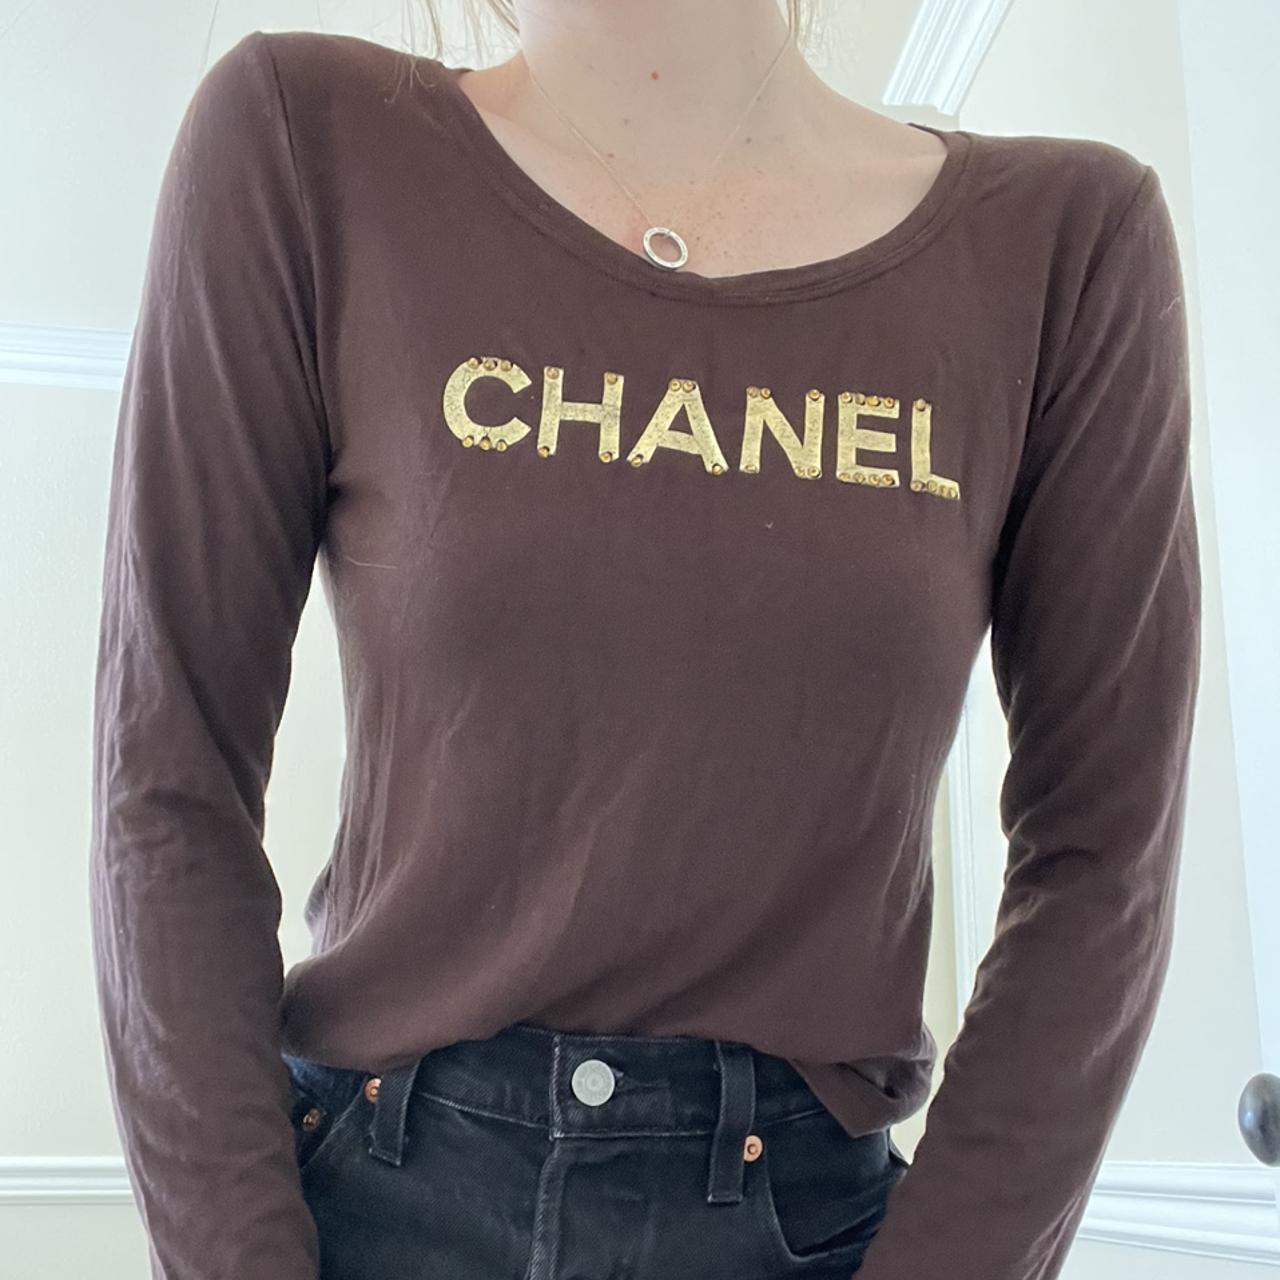 Authentic vintage Chanel brown long sleeve top with